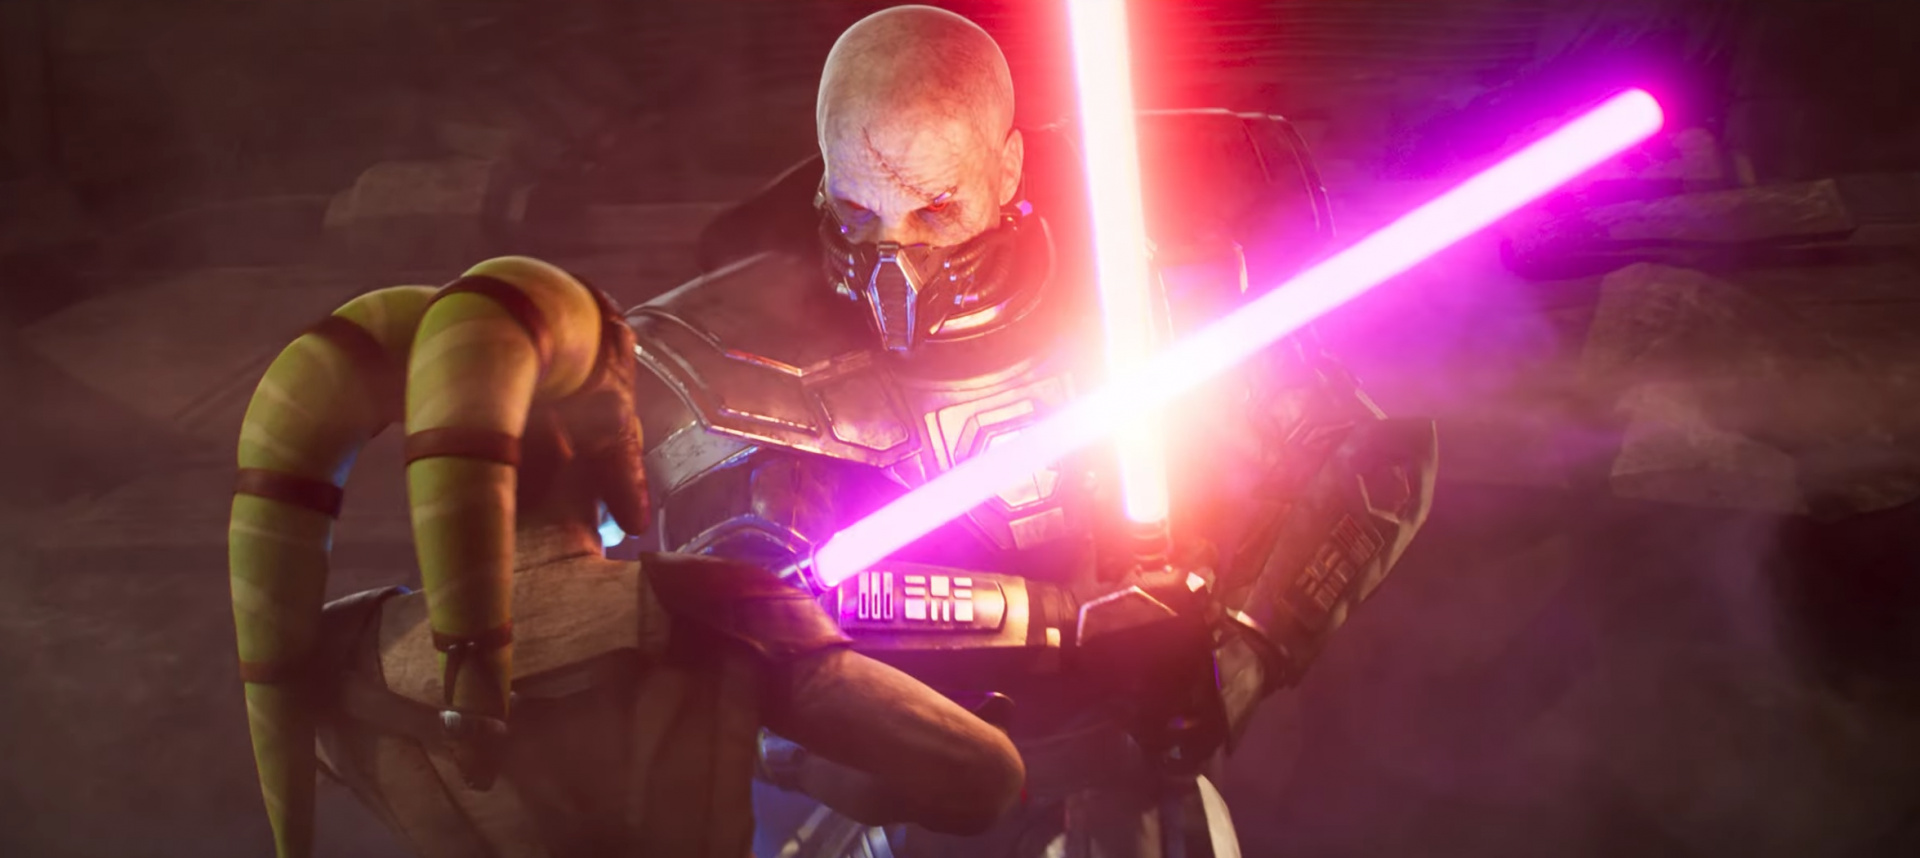 Cinema trailer for the release of the Lefacy of the Sith supplement for Star Wars The Old Republic